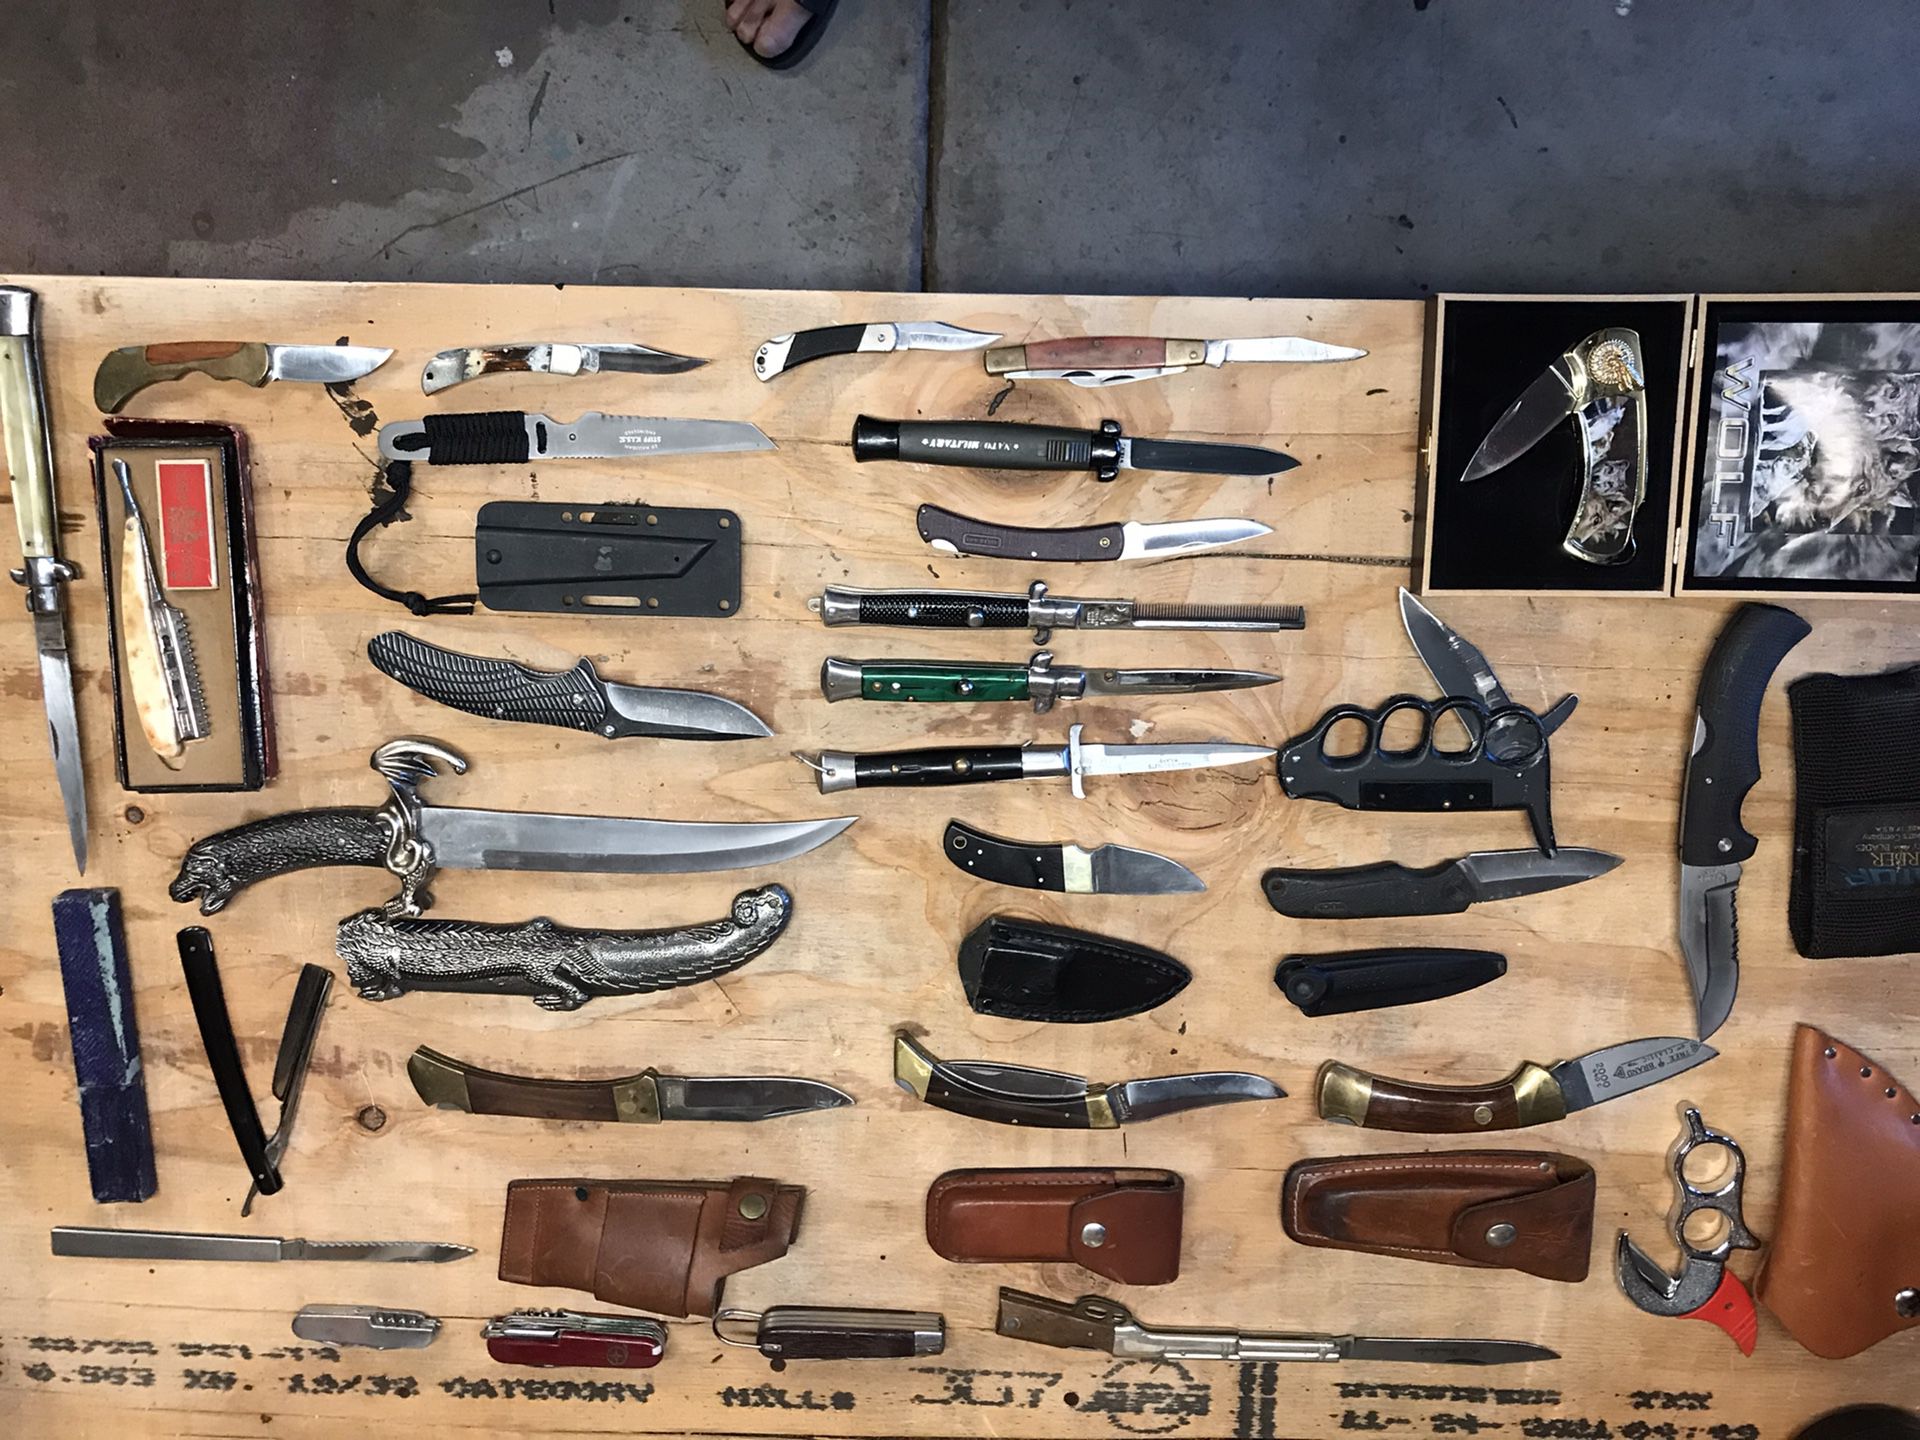 Knife Collection for Sale in Antioch, CA - OfferUp